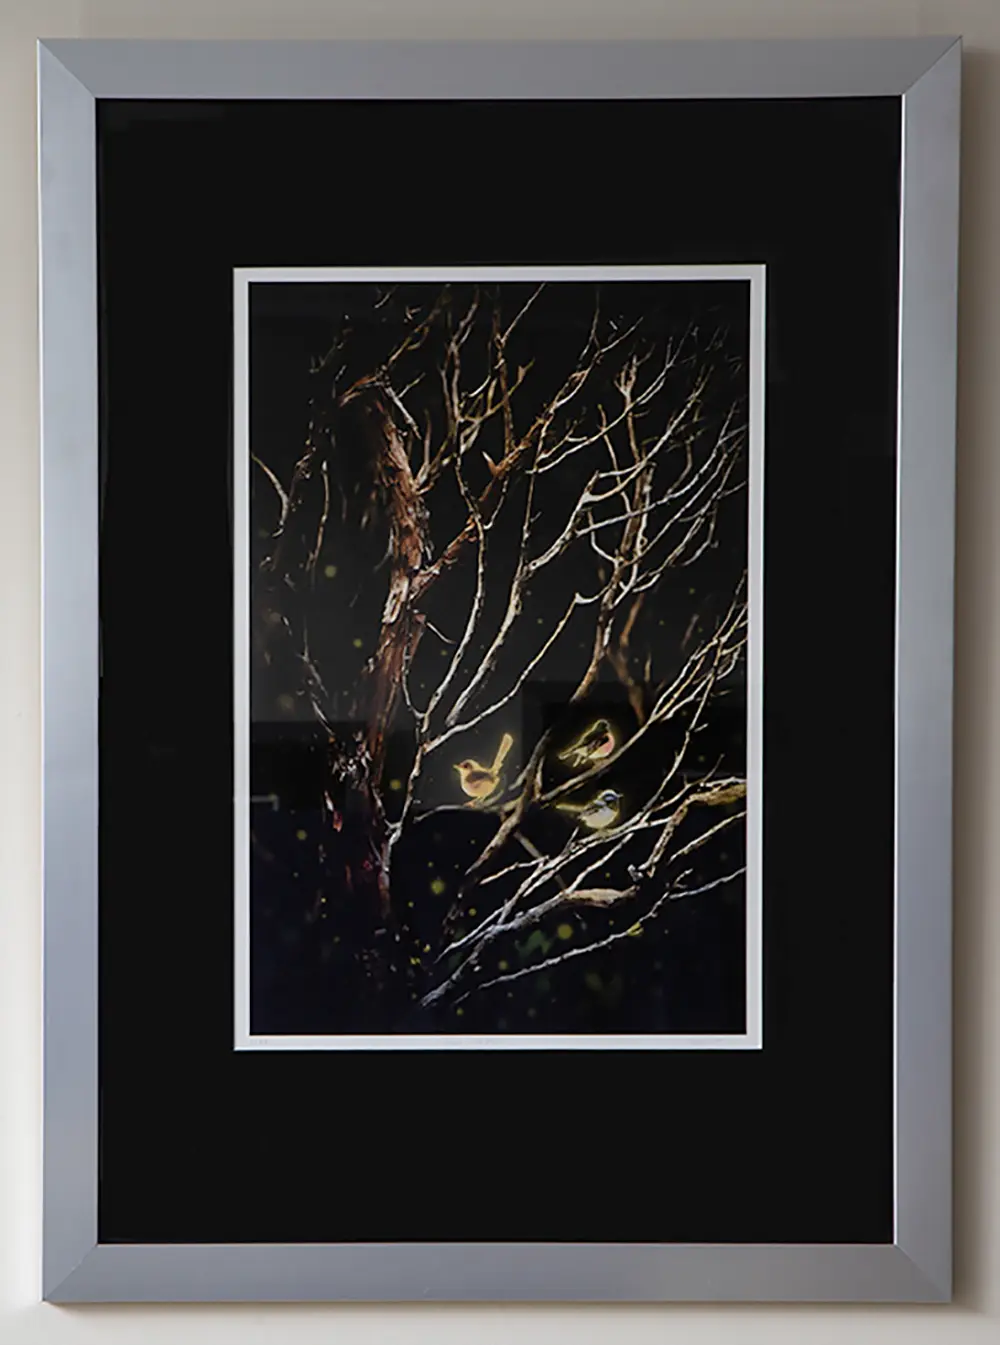 Framed image of limited edition print, Three Little Birds